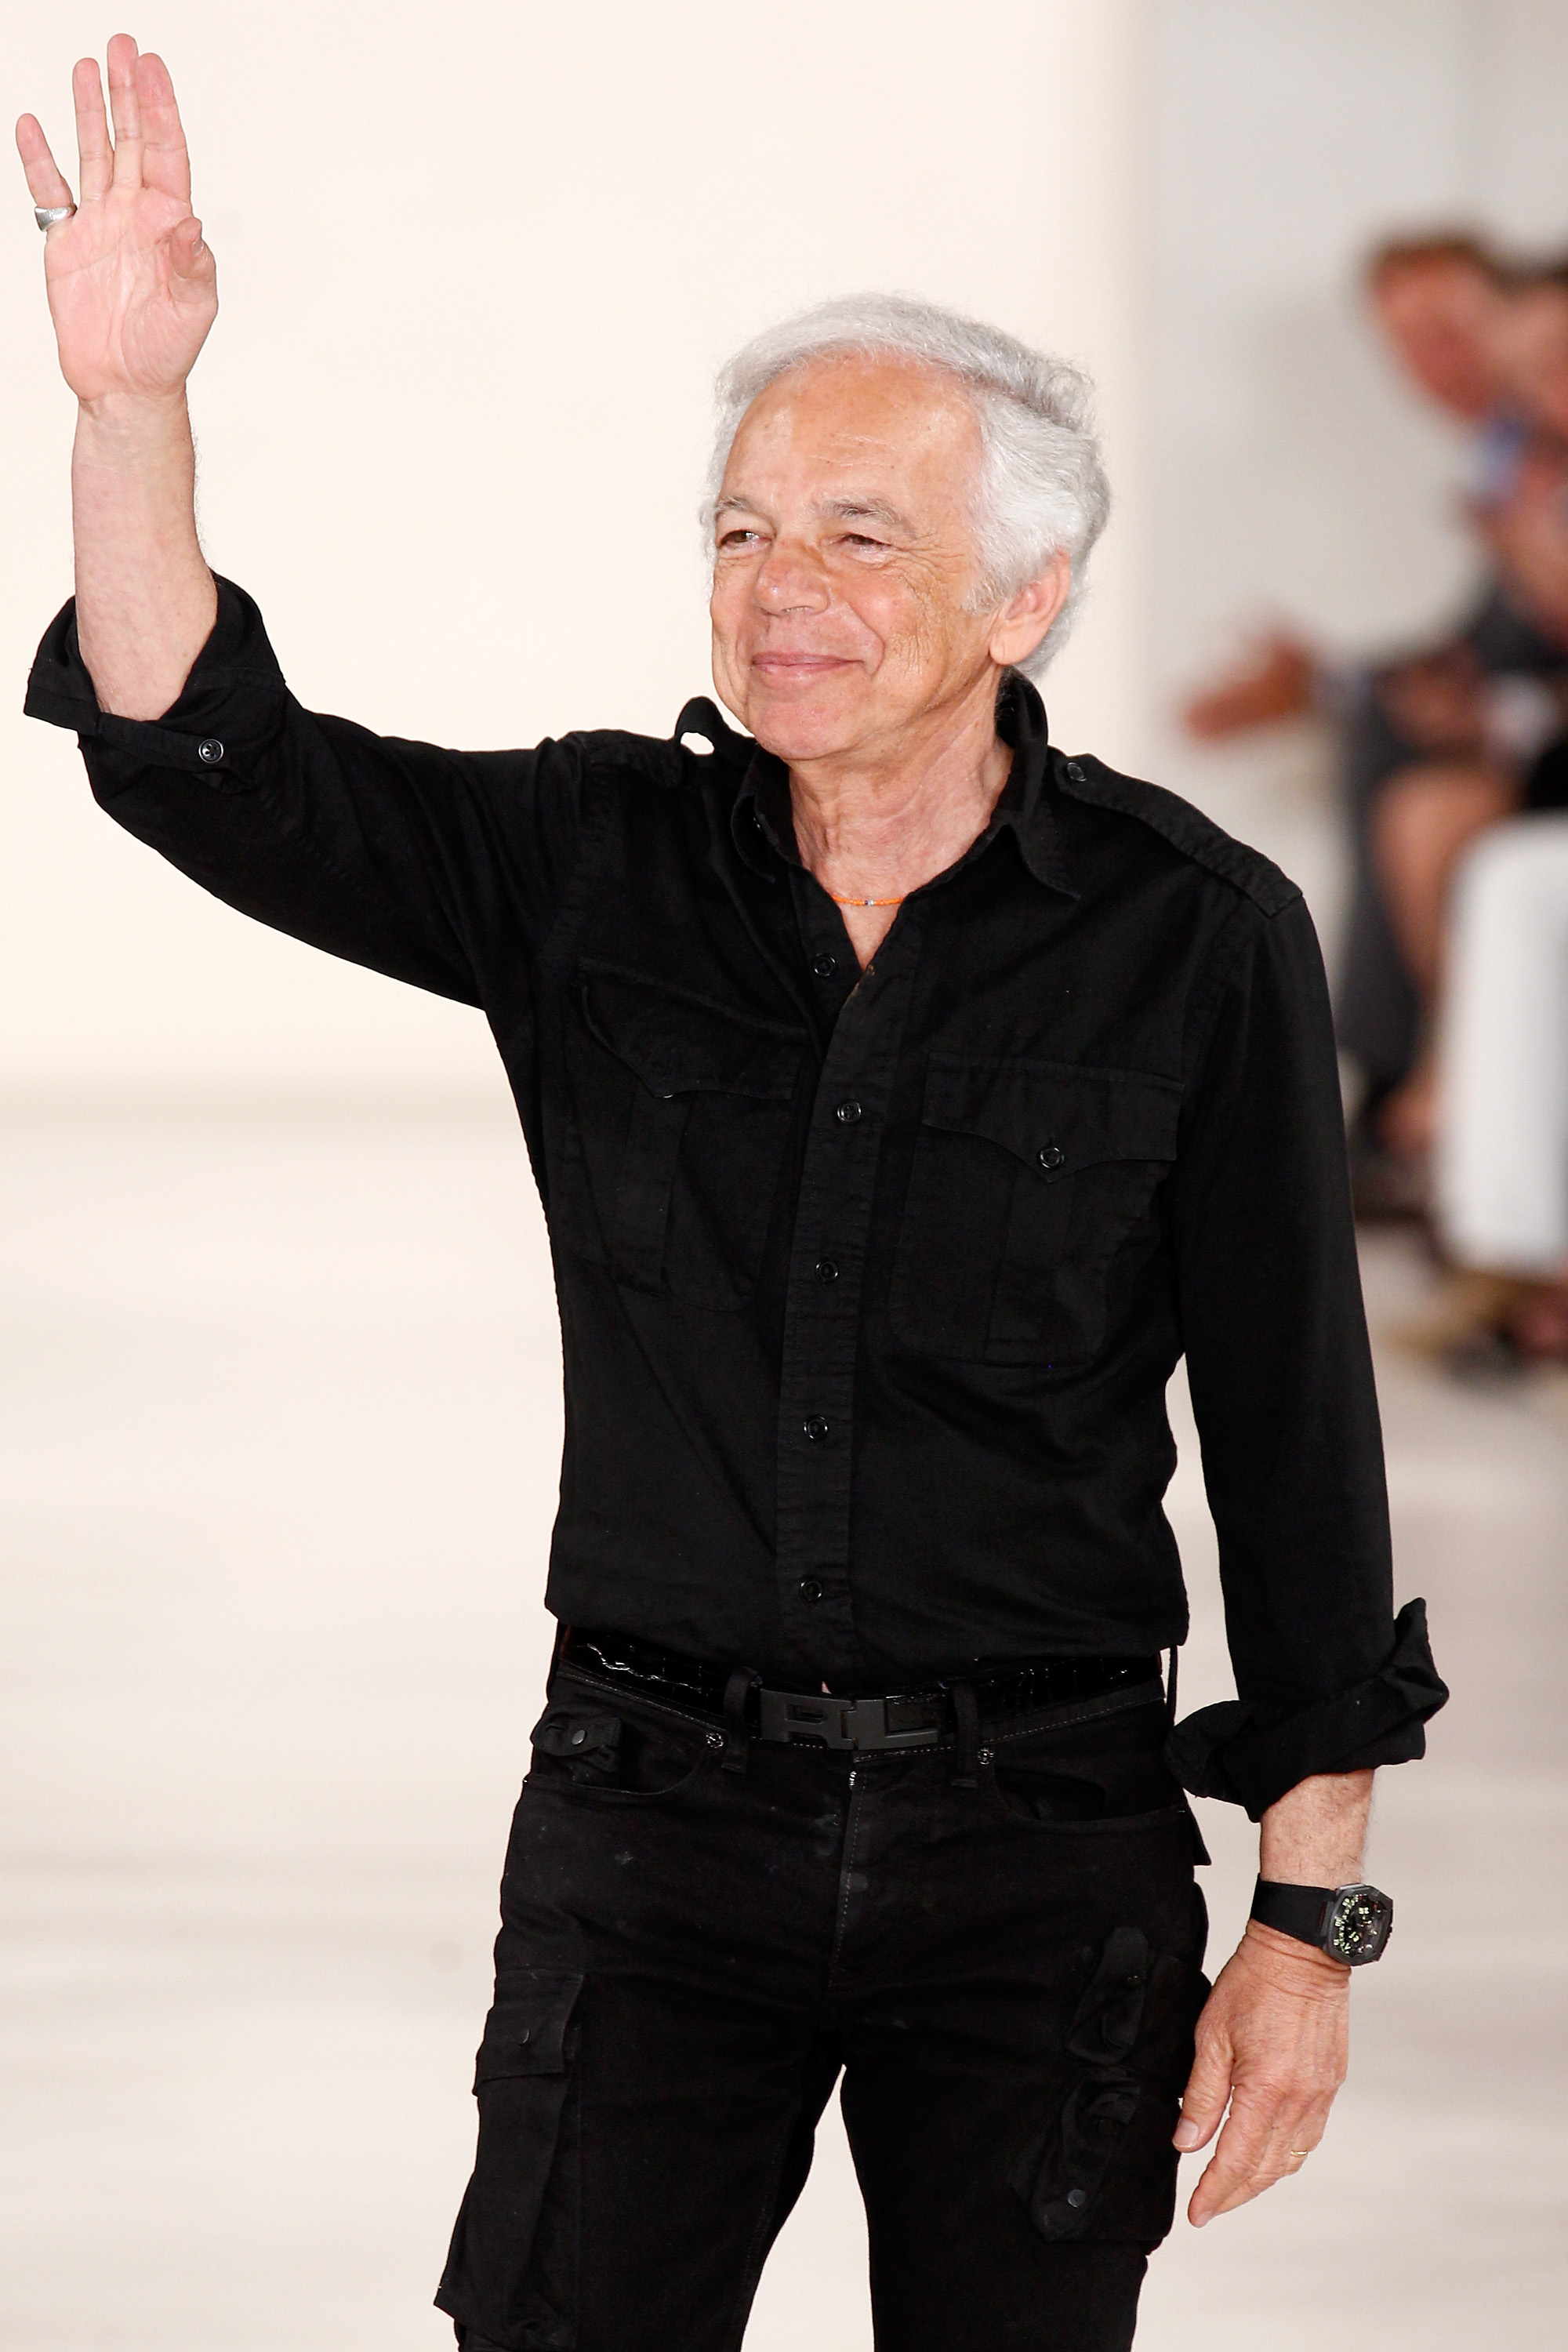 Ralph Lauren at the Ralph Lauren fashion show during Mercedes-Benz Fashion Week Spring 2015 in New York City on Sept. 11, 2014. (Peter Michael Dills—Getty Images for Mercedes-Benz)